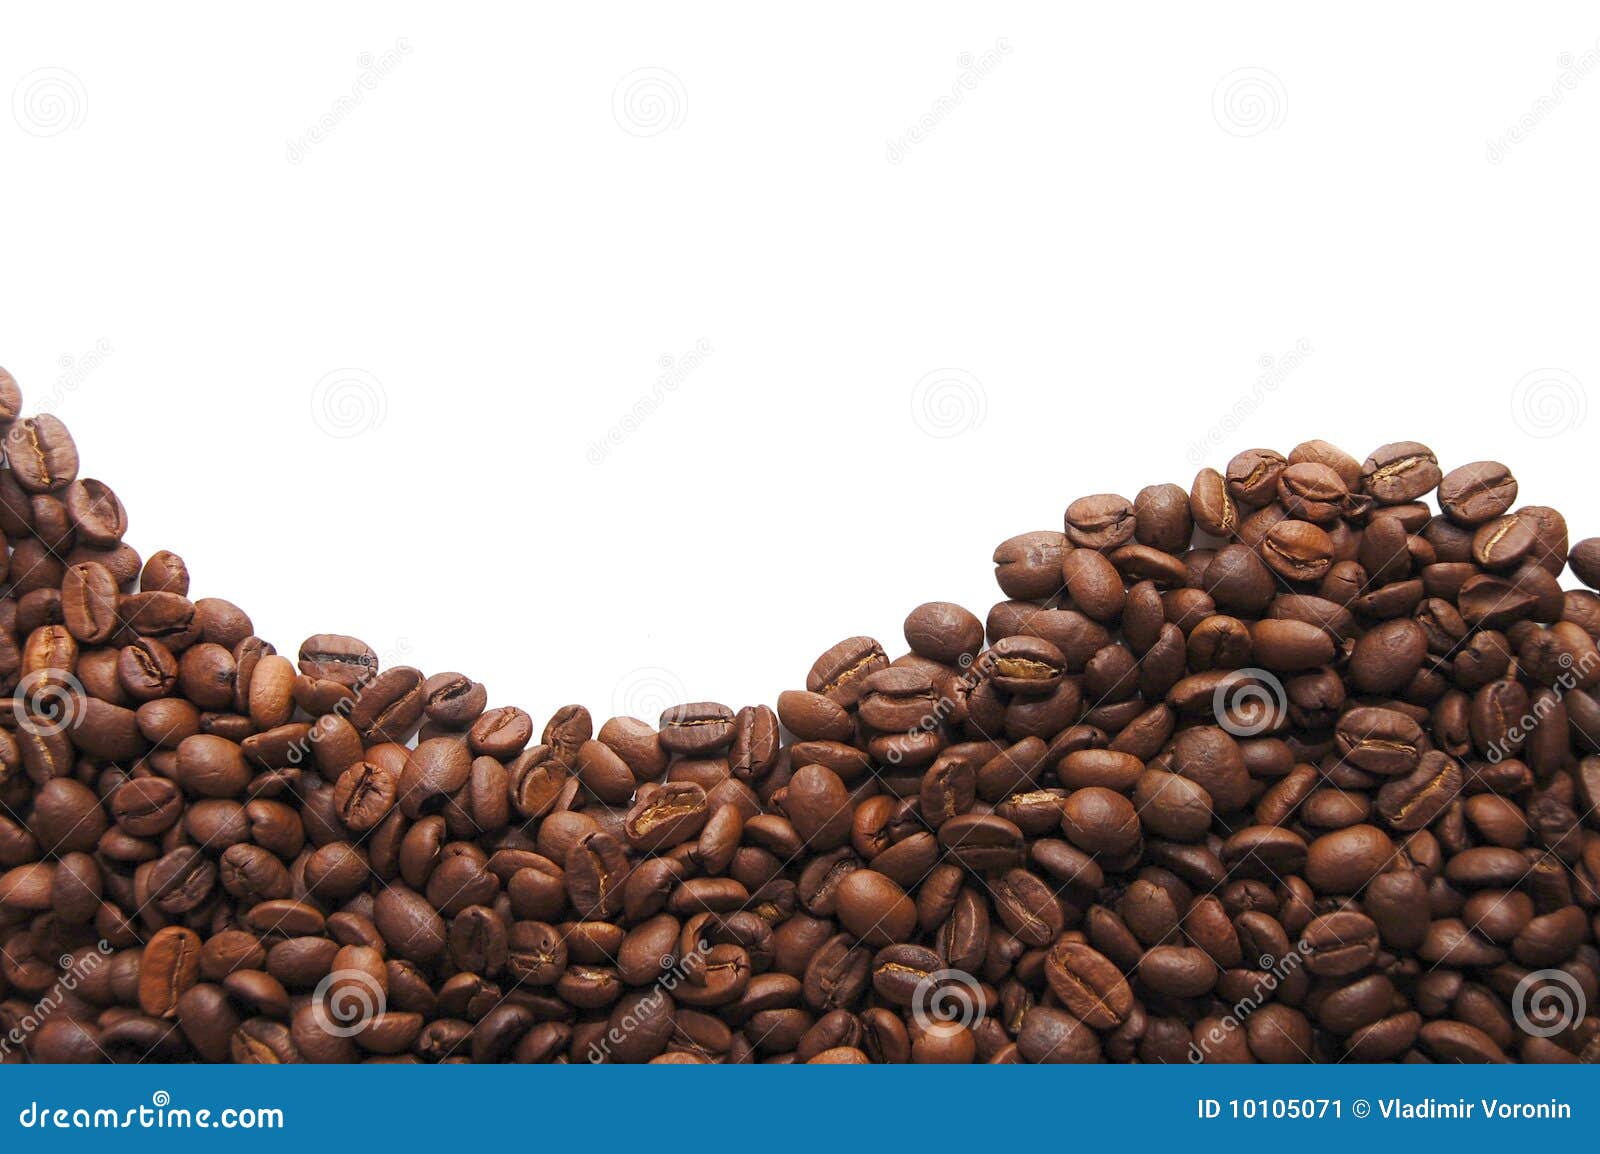 Aromatic Coffee Beans On White Background Stock Image